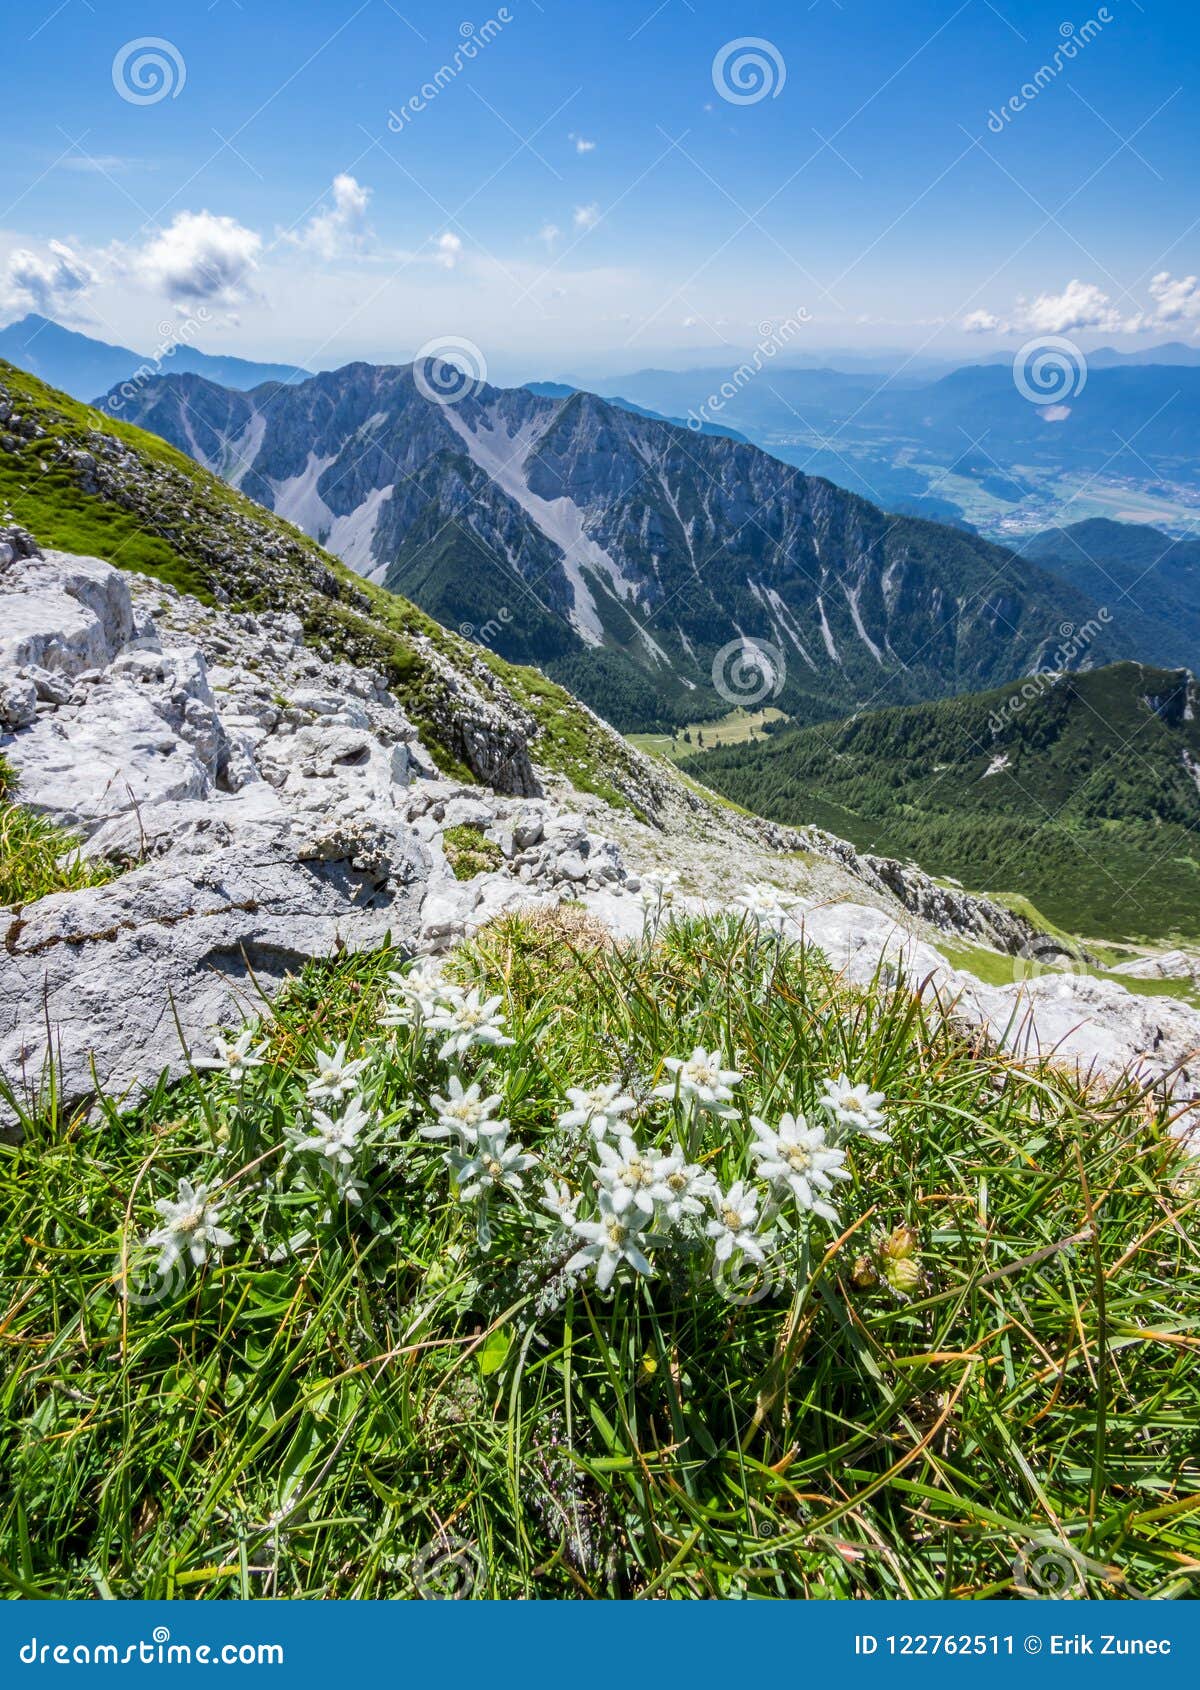 Edelweiss On The Meadow On Top Of The Mountain Royalty Free Stock Photo